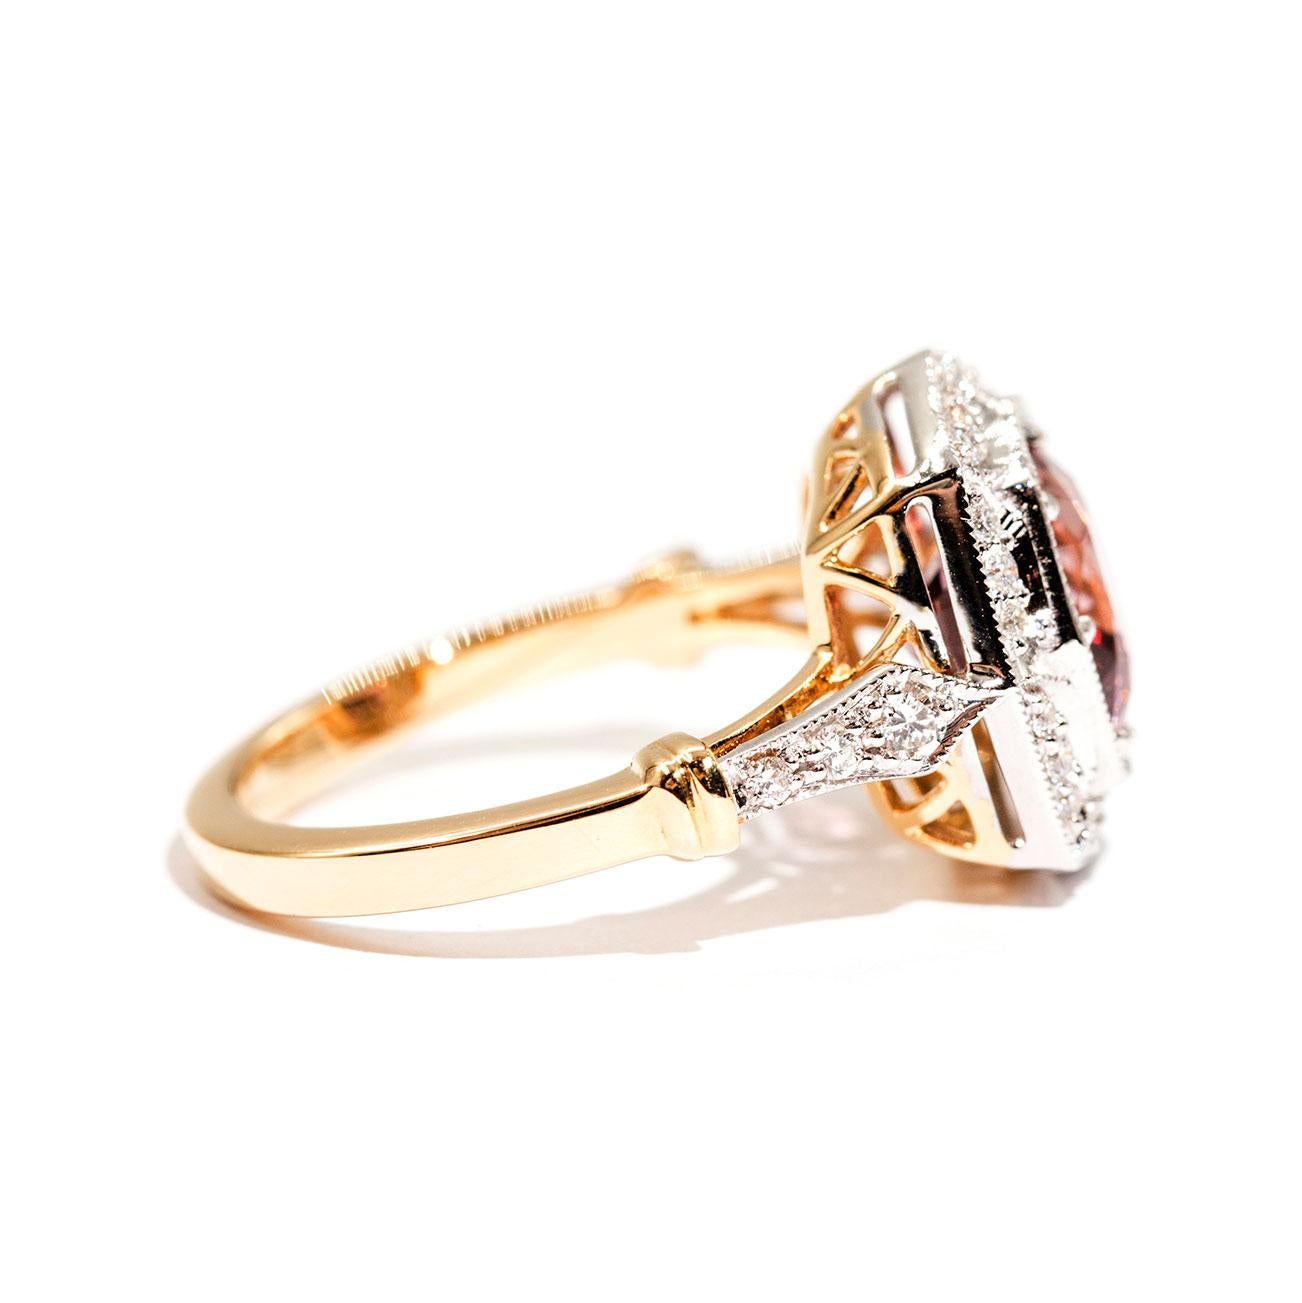 Contemporary 3.16 Carat Cushion Cut Red Pink Spinel and Diamond 18 Carat Gold Halo Ring